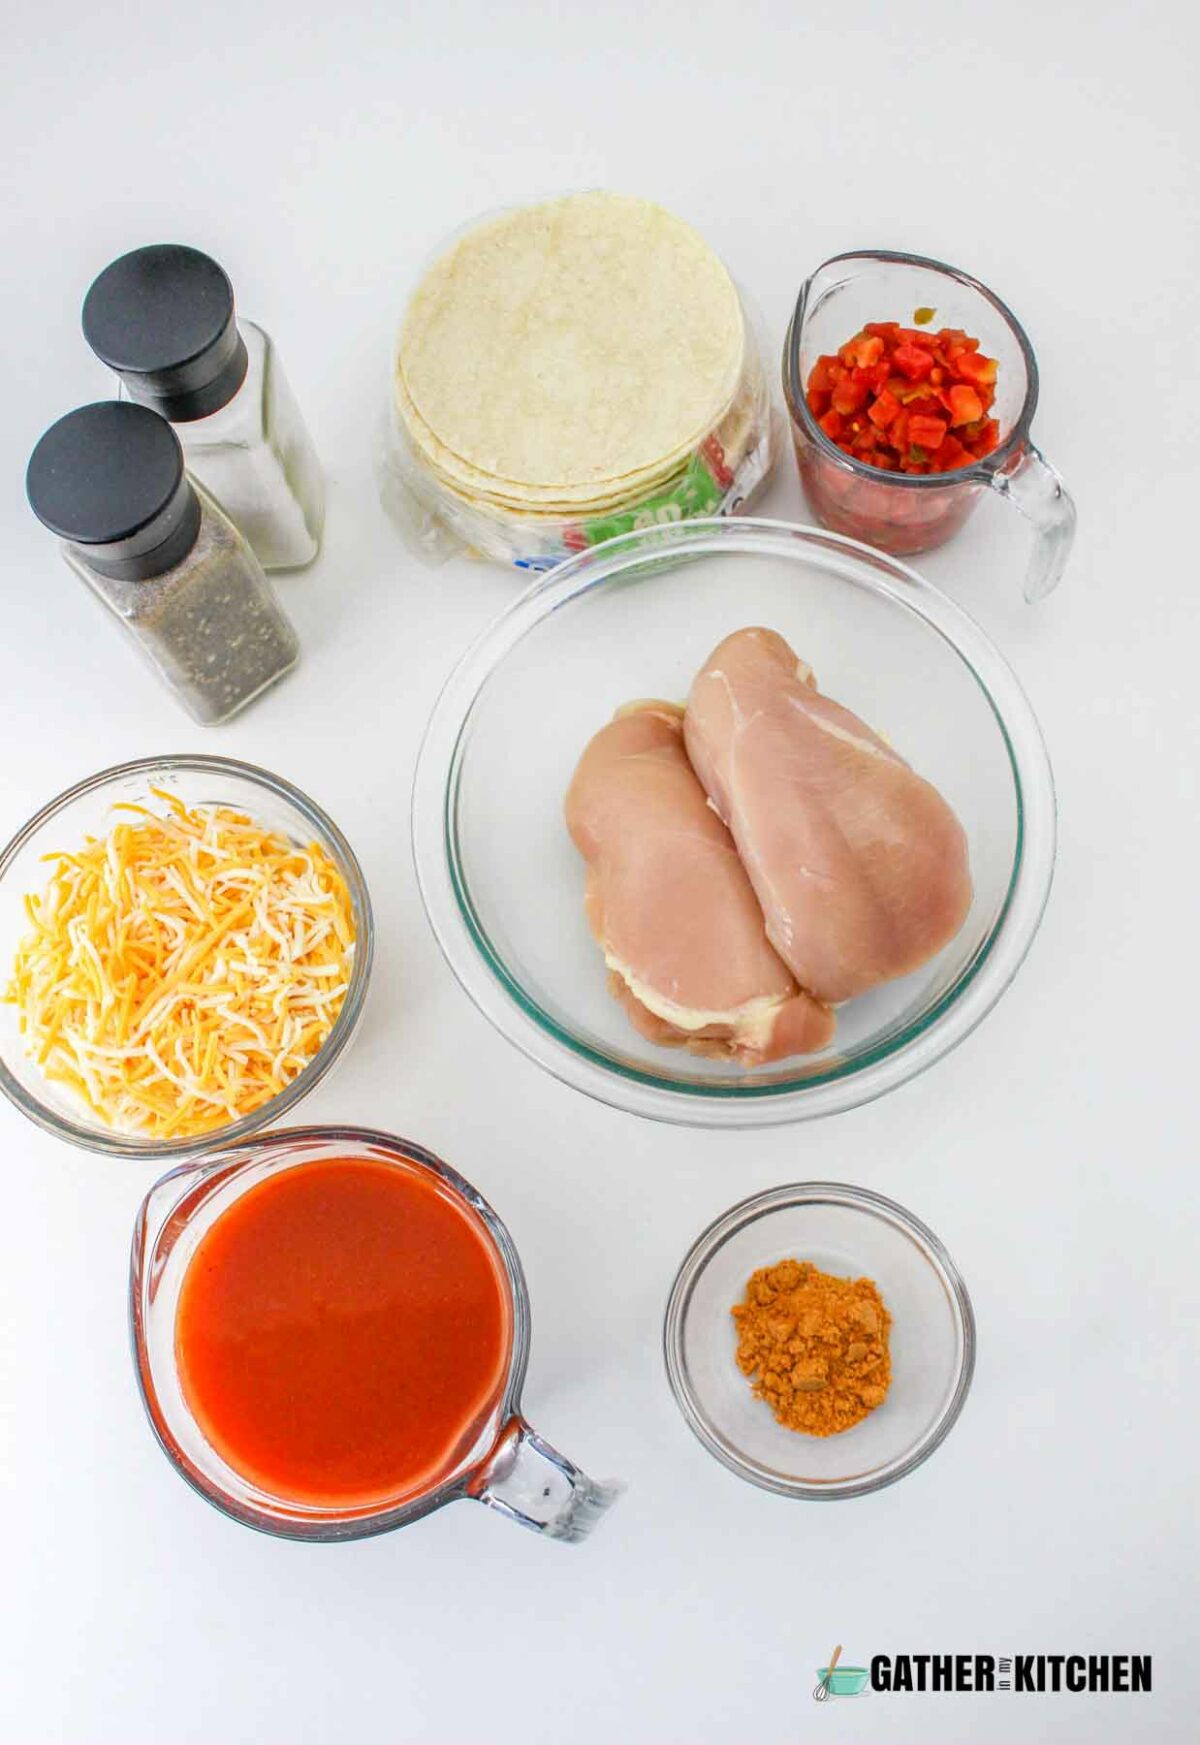 Ingredients for slow cooker enchilada casserole: chicken, taco seasoning, enchilada sauce, tomatoes with green chiles, corn tortillas, fiesta blend cheese.